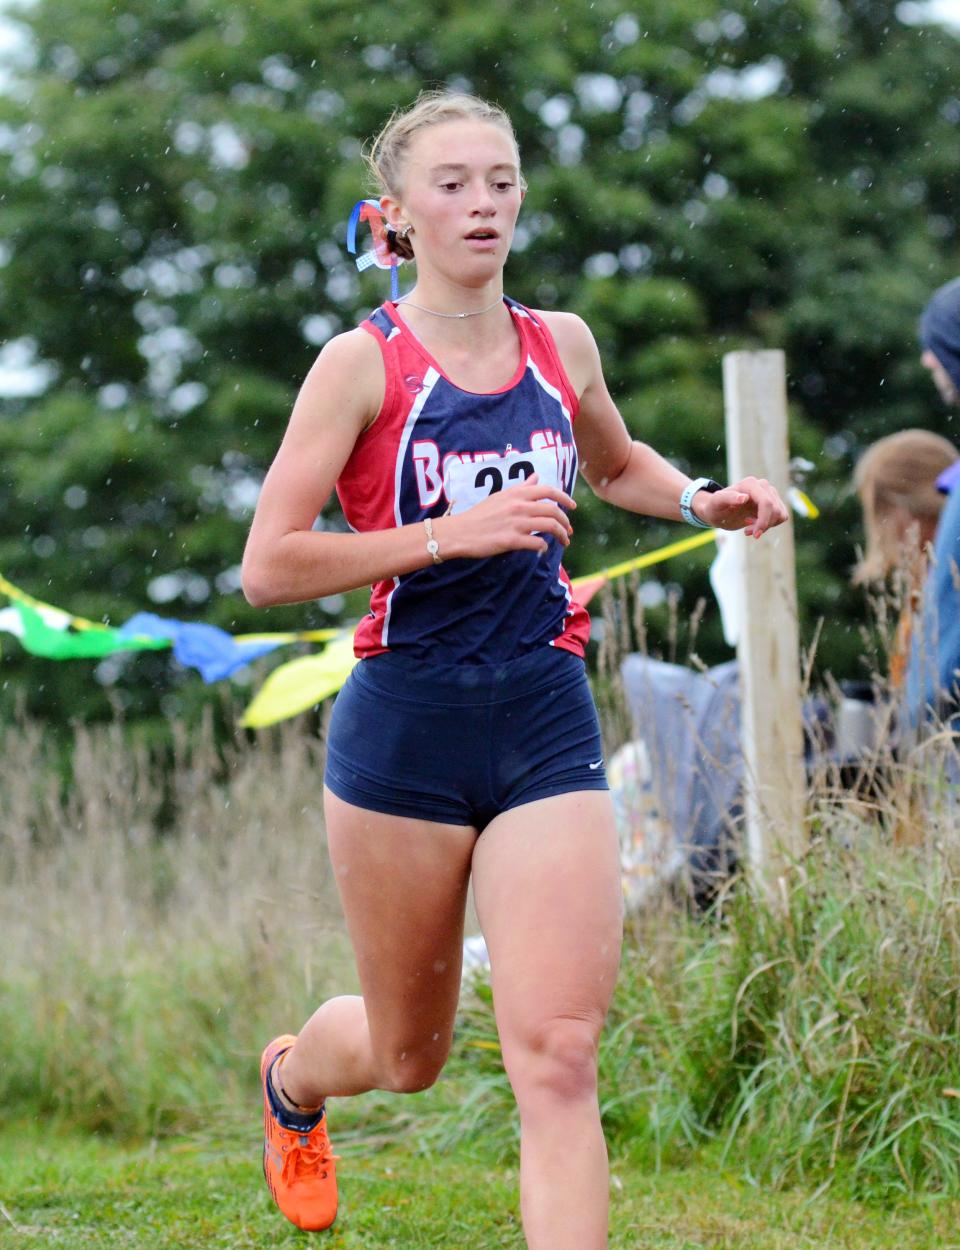 In cross country, Boyne City's Ava Maginity earned four straight all-state seasons, which included an 11th place finish in the state this fall.